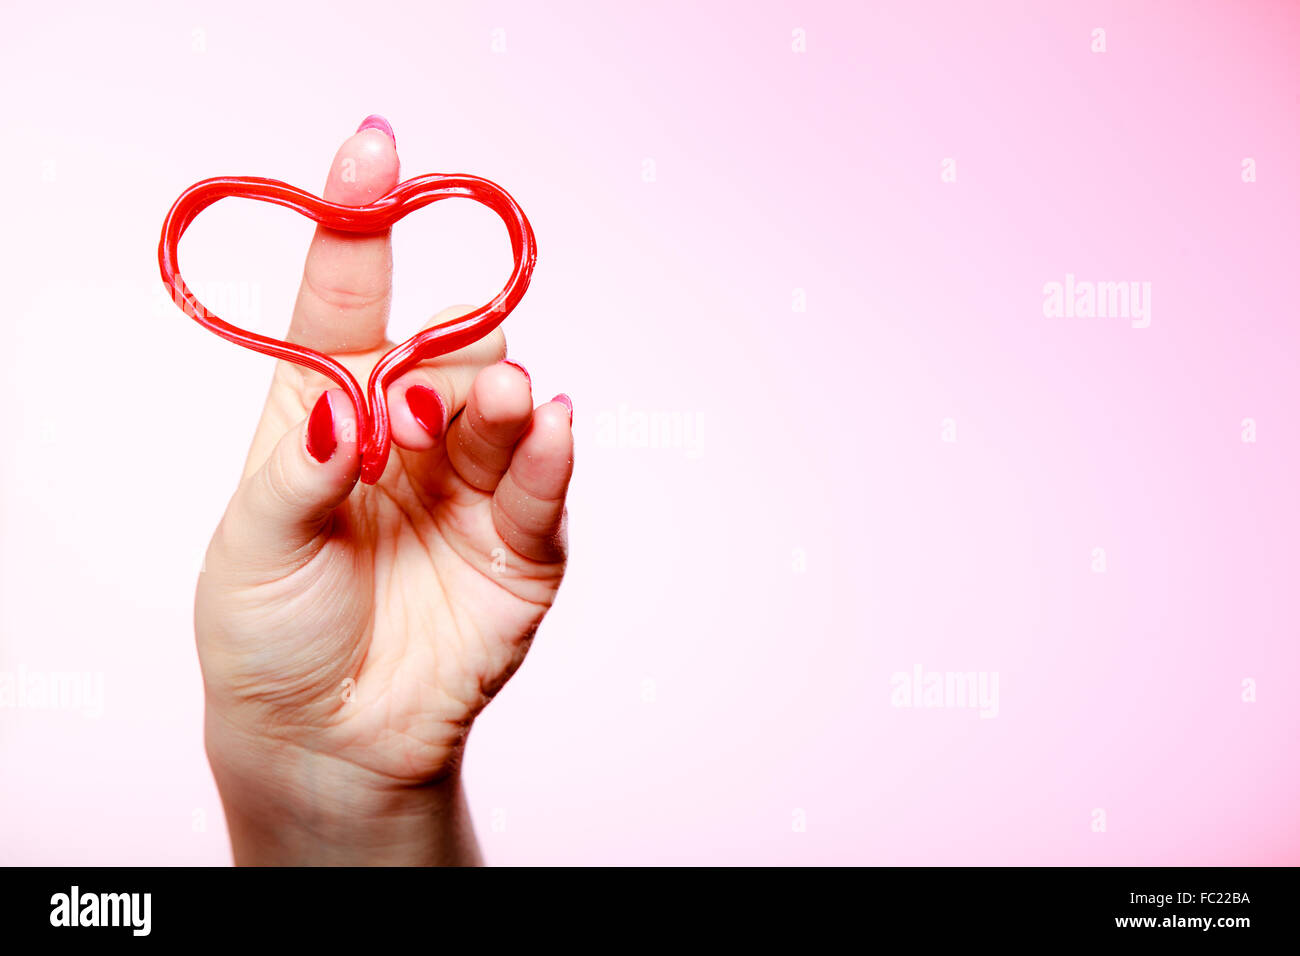 Female hahd holding red heart love symbol. Valentines day. Stock Photo